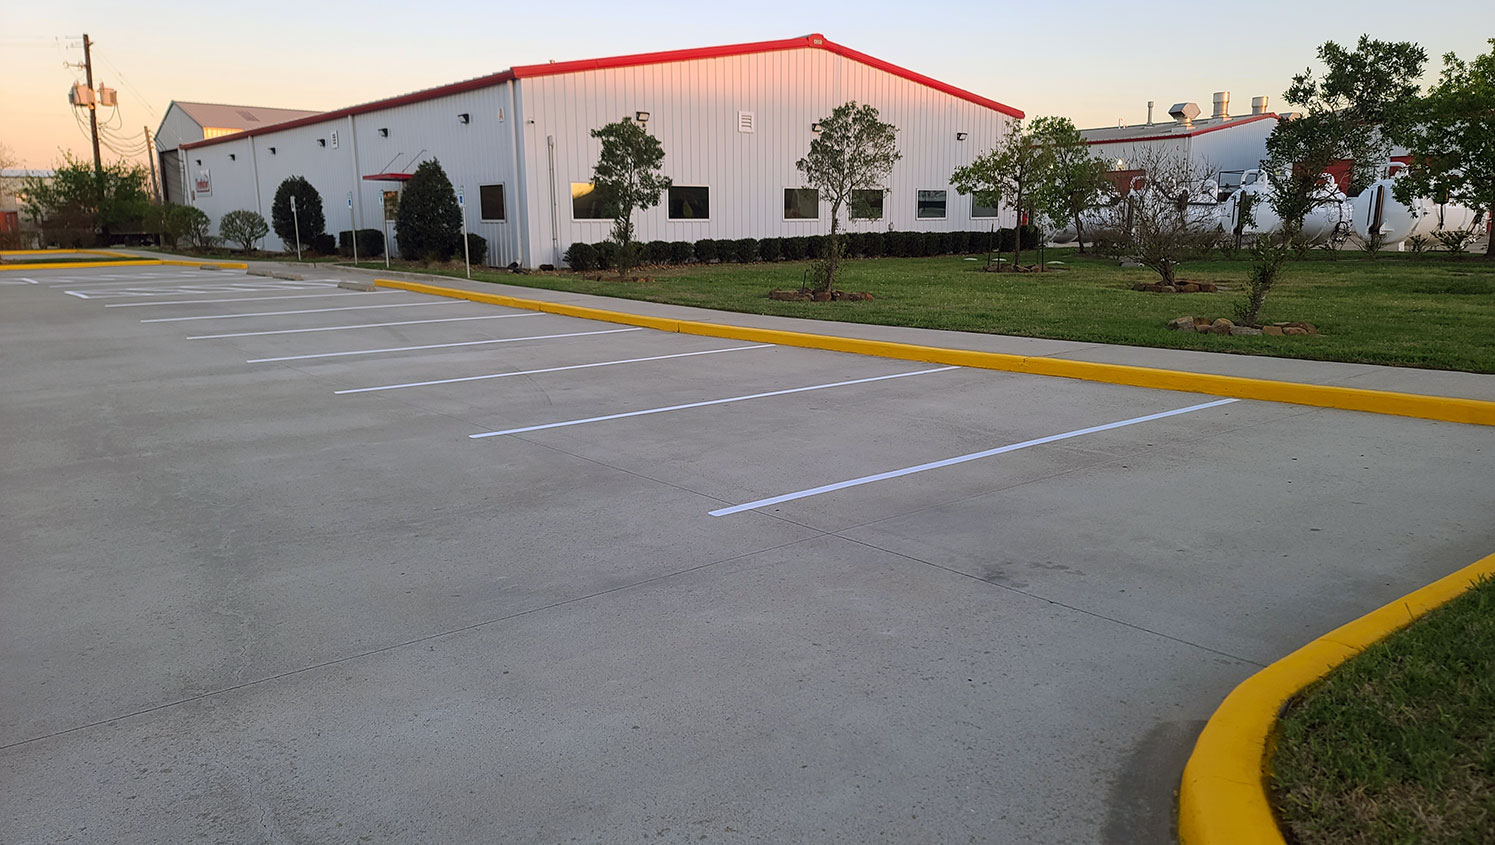 repainted curbing and parking spaces